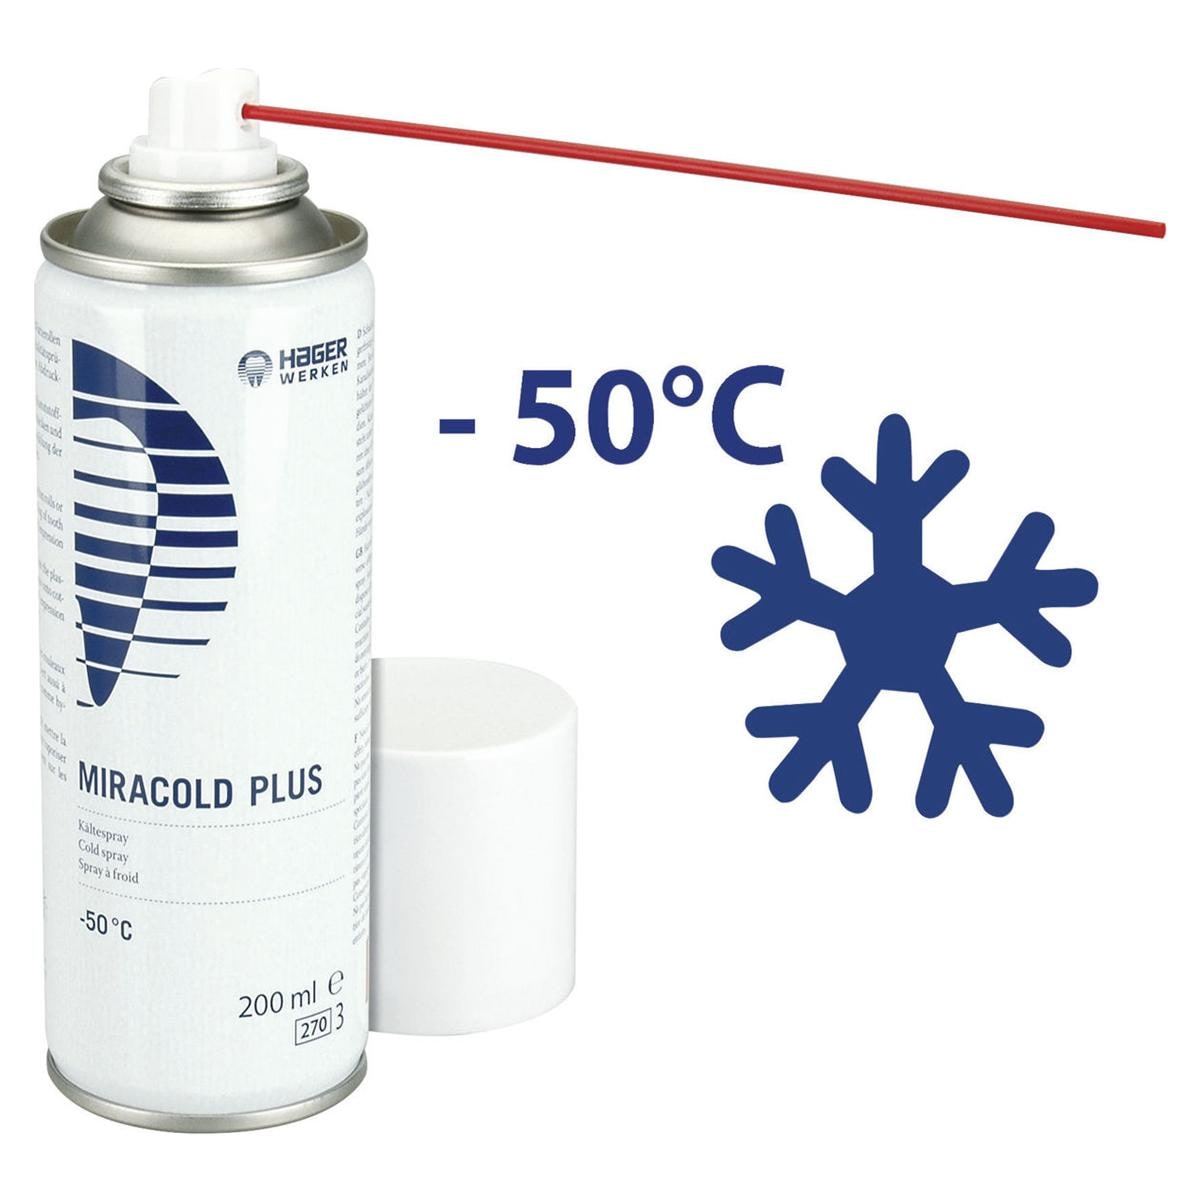 Miracold Plus - 200 ml